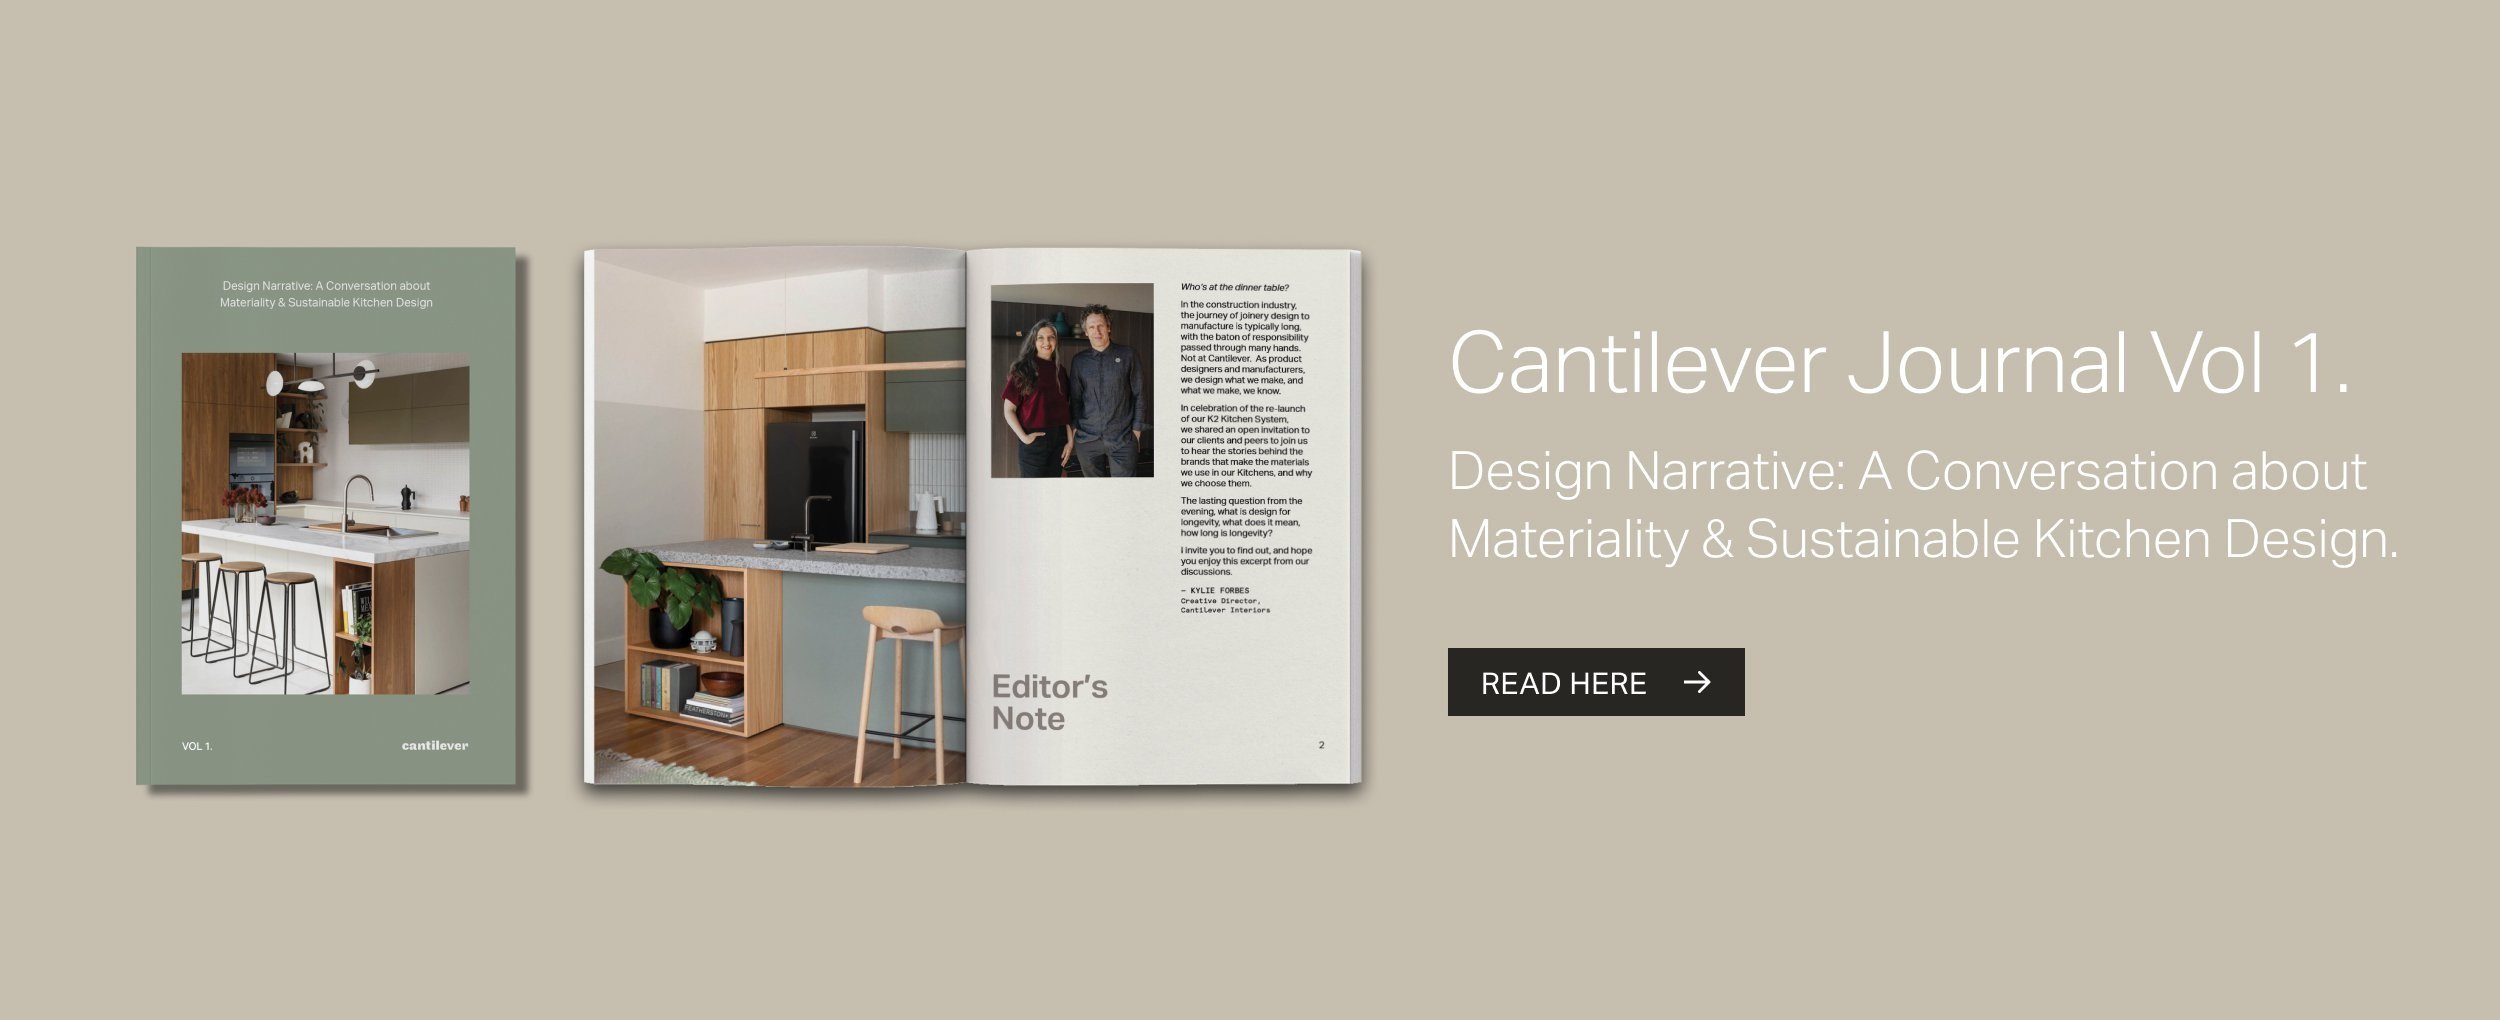 The Cantilever Journal Vol 1.